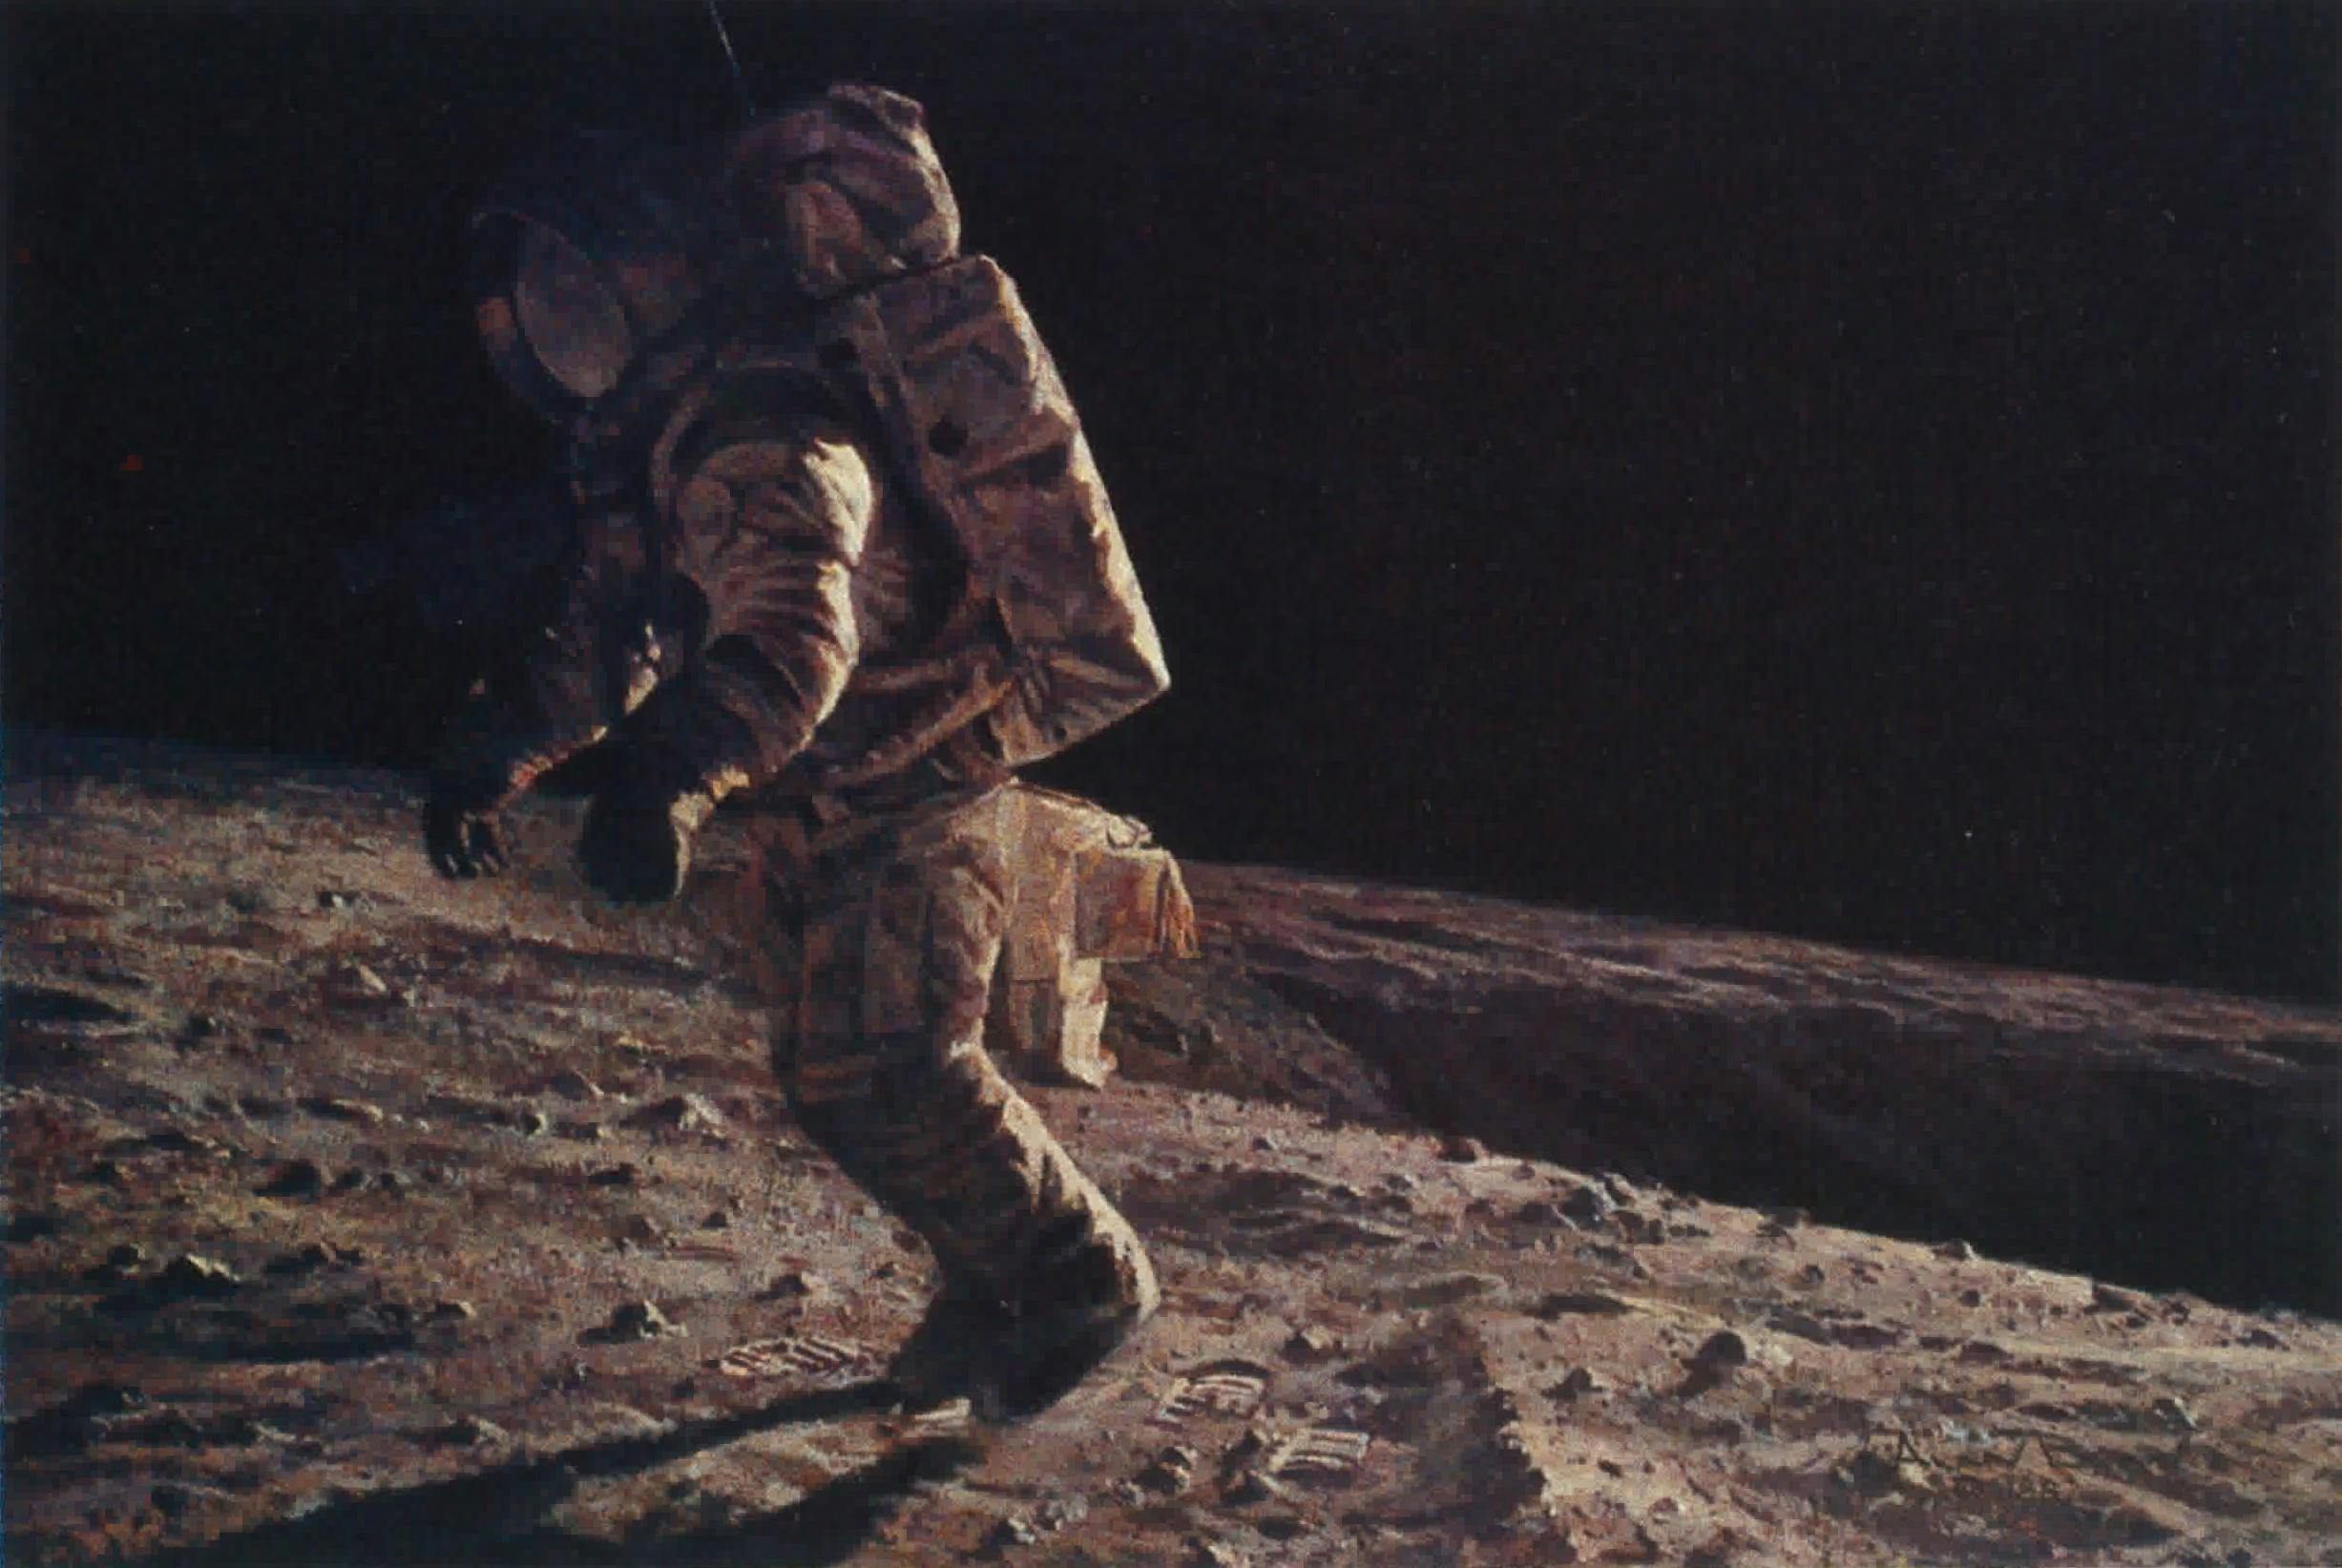 Tiptoeing on the Ocean of Storms, 1982 This self-portrait is Bean's favorite painting. "I can remember running along next to this crater," he says. "It seemed I could run forever and not get tired." The moon's weak gravity and their stiff space suits led the astronauts to puss off with just toes when taking a step. To Bean it felt like "dancing on tiptoe."